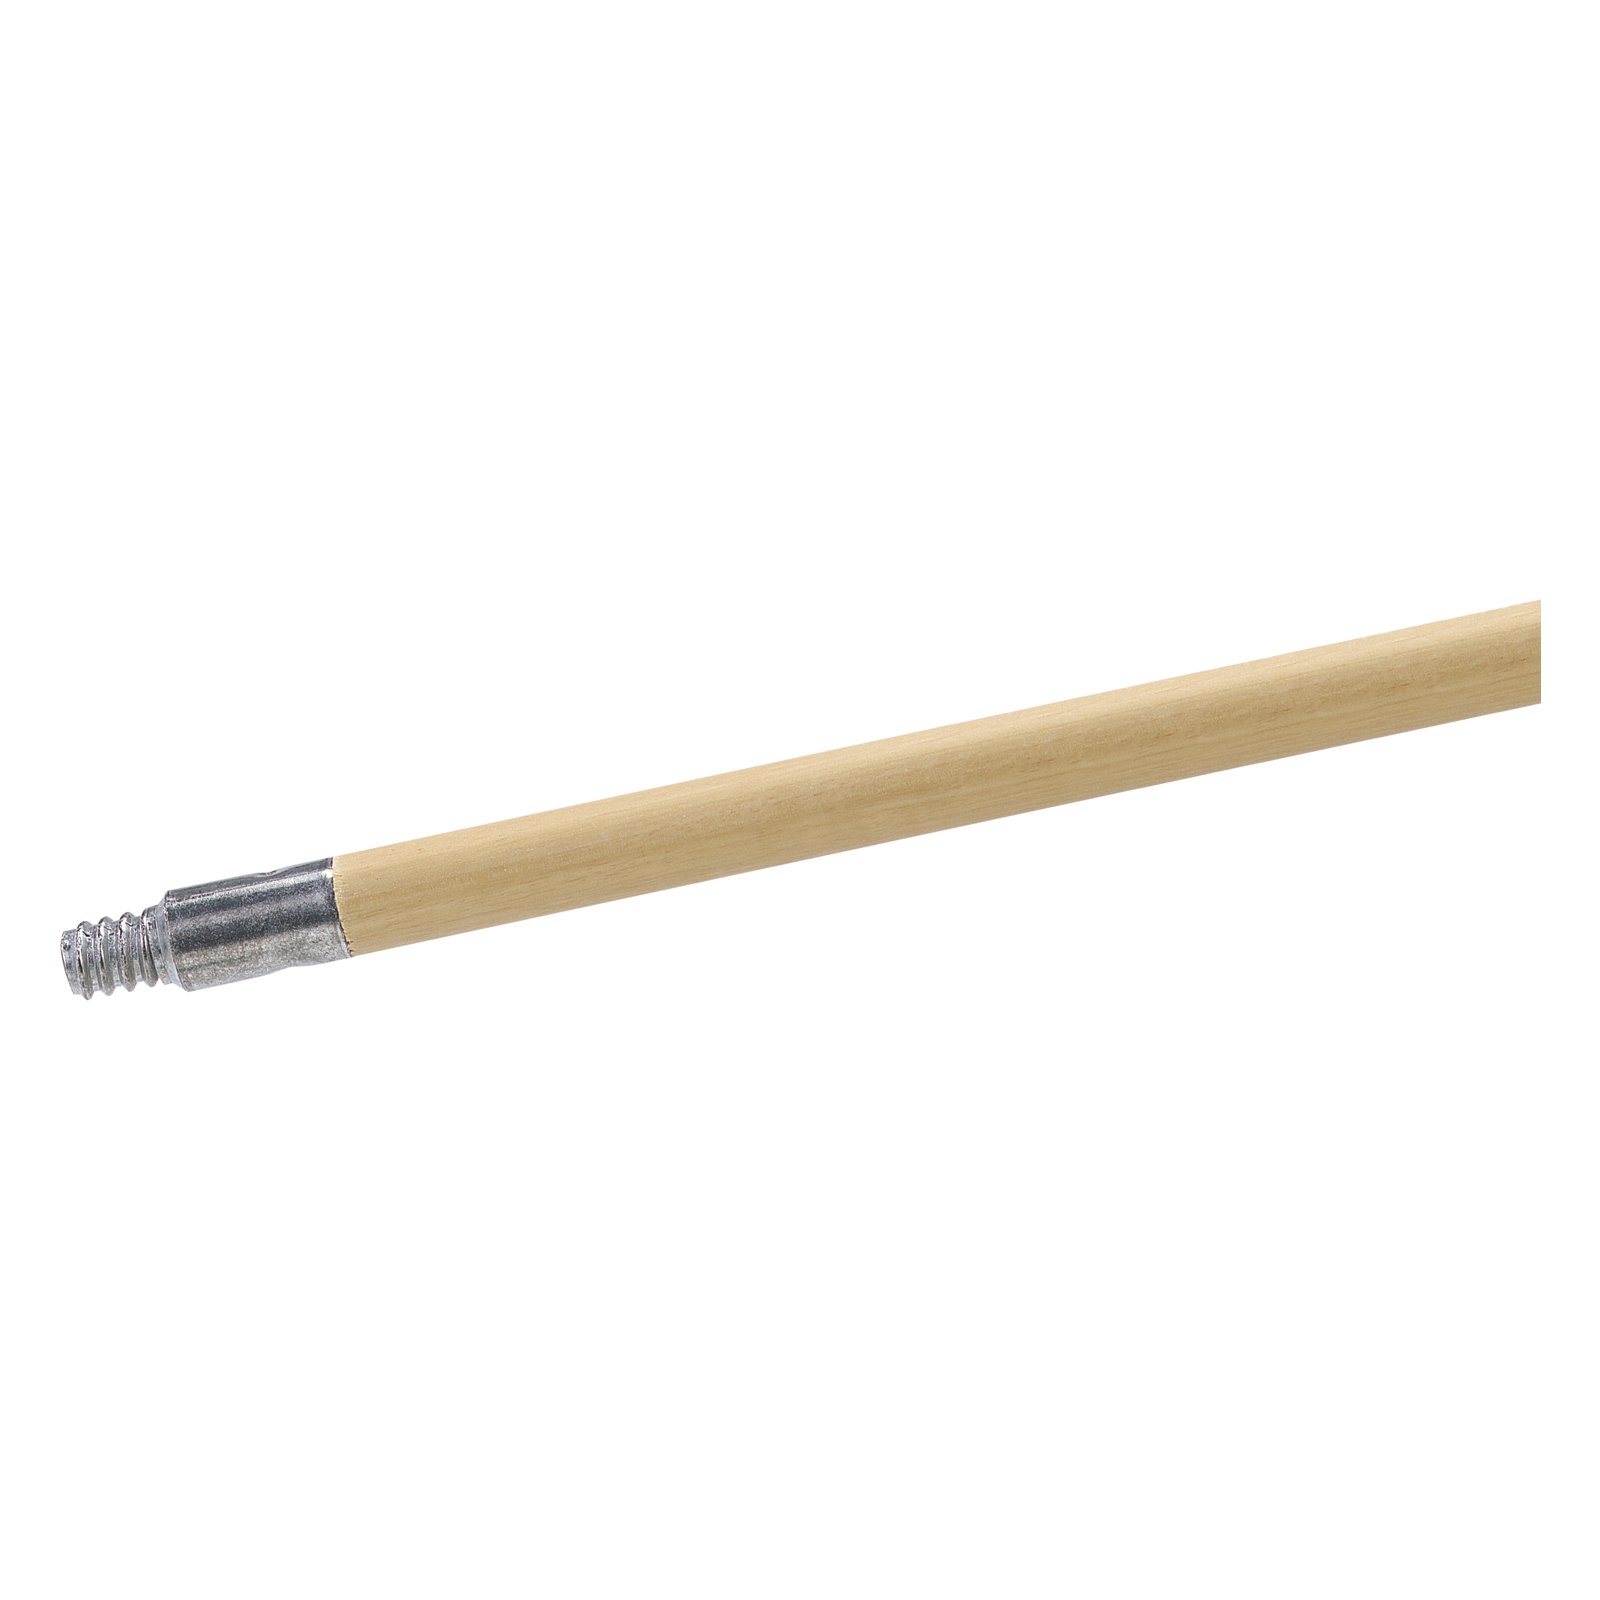 Magnolia Brush M-72 Hardwood Metal Threaded Handle with Clear Lacquered Finish Case of 12 15/16 Diameter x 6 Length 